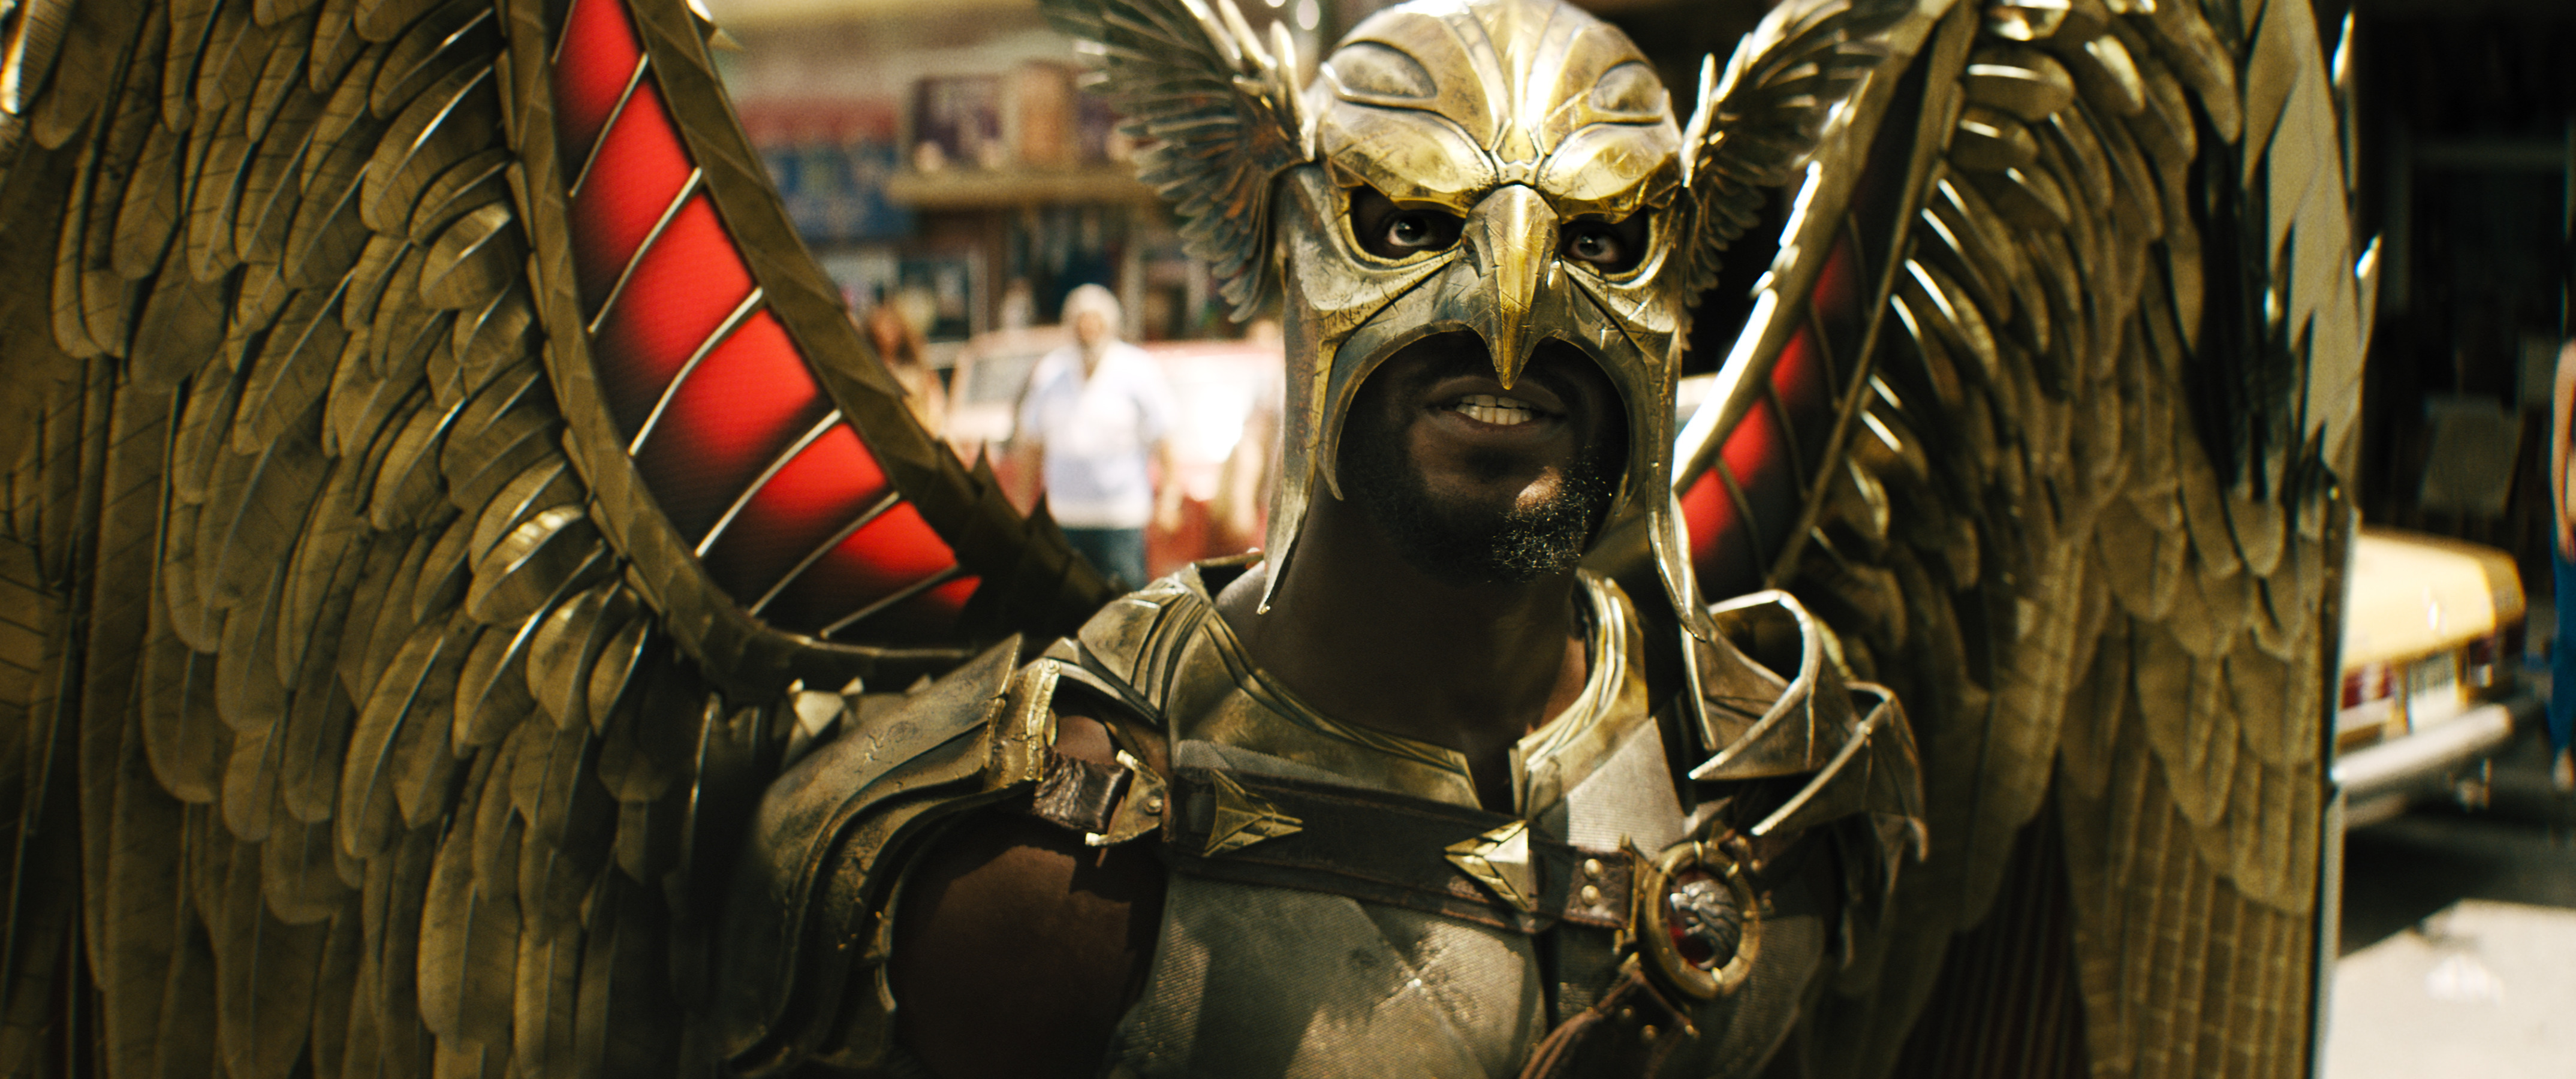 Aldis Hodge as Hawkman in Black Adam. He’s wearing his outfit: An armored chestpiece, a hawk-like helmet that masks the top of his face, and a set of huge metal wings.